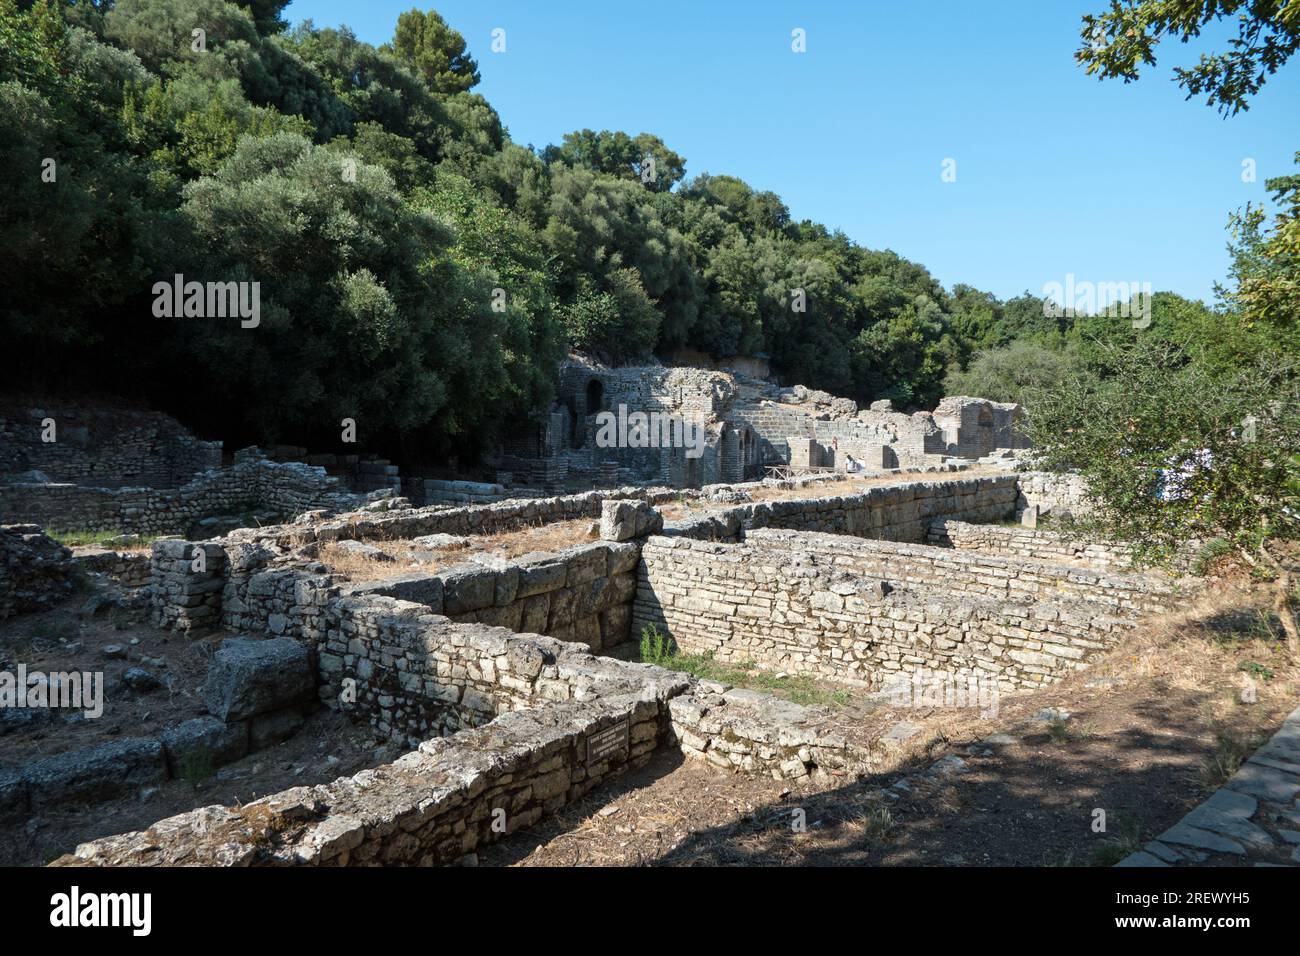 View of the archeological site of Butrint in Albania, an ancient Greek polis and Roman city. UNESCO World Heritage Site and National Park Stock Photo